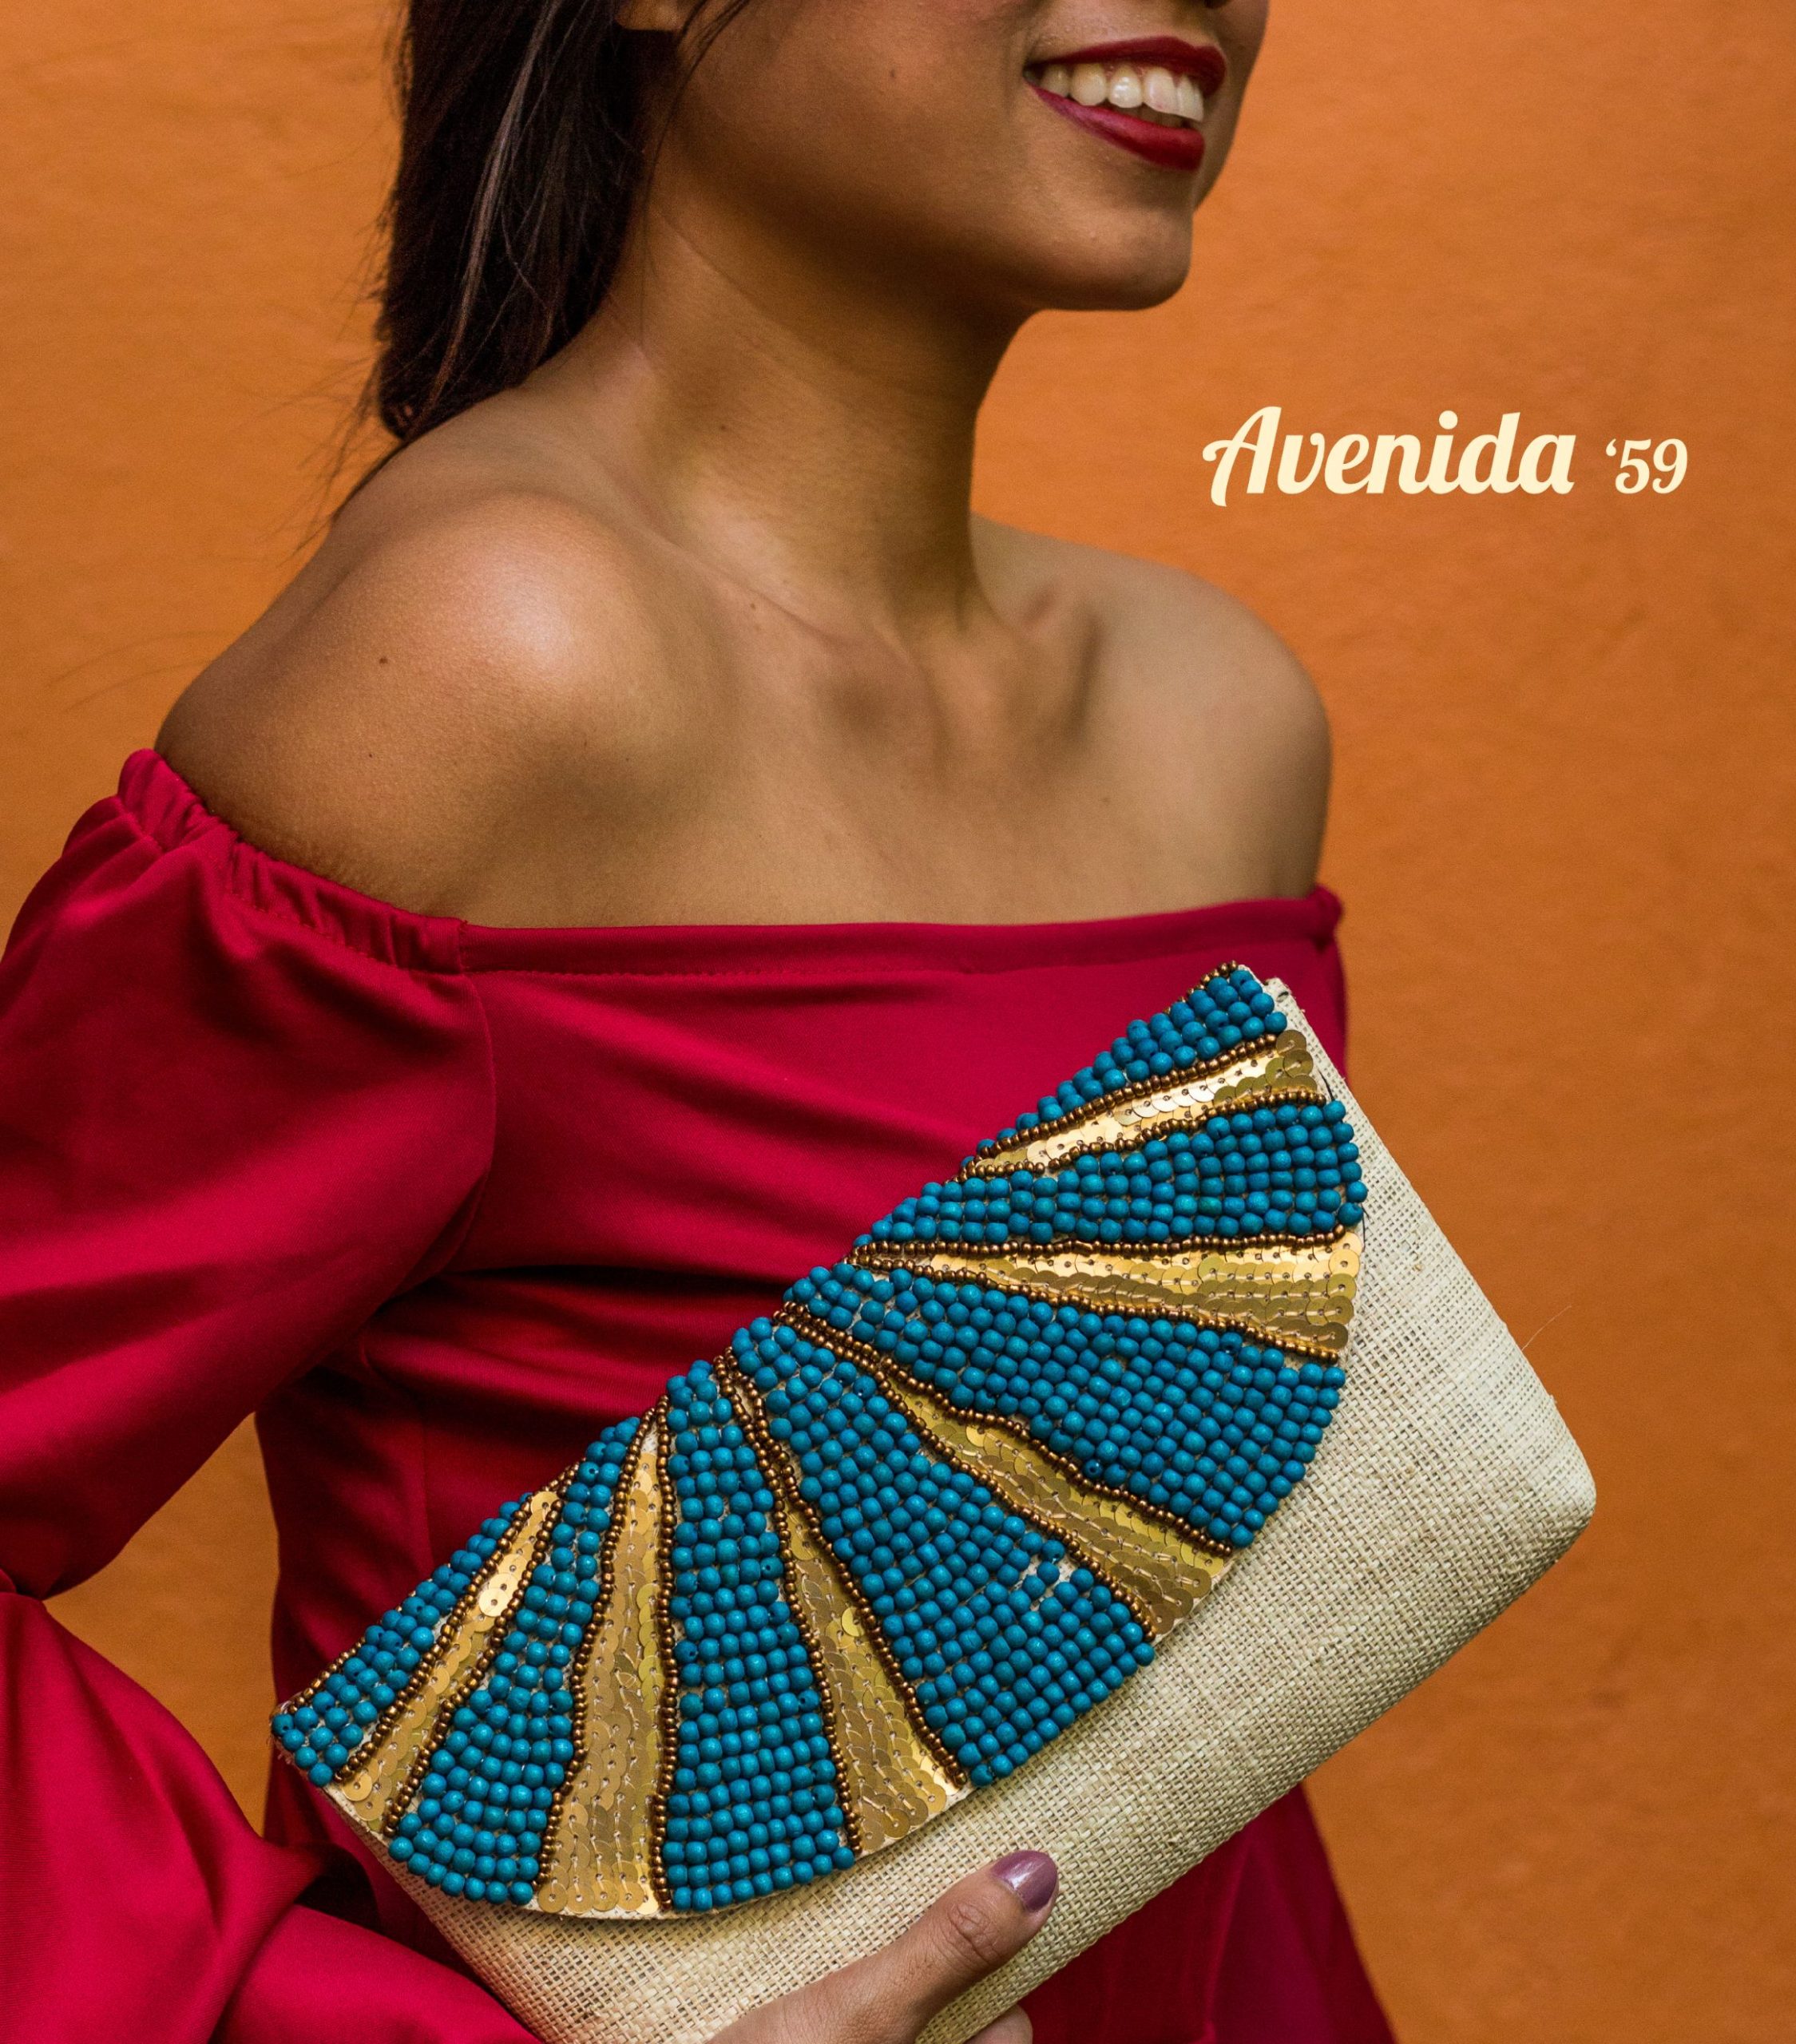 an image of a woman wearing a red dress holding a clutch bag with words Avenida '59